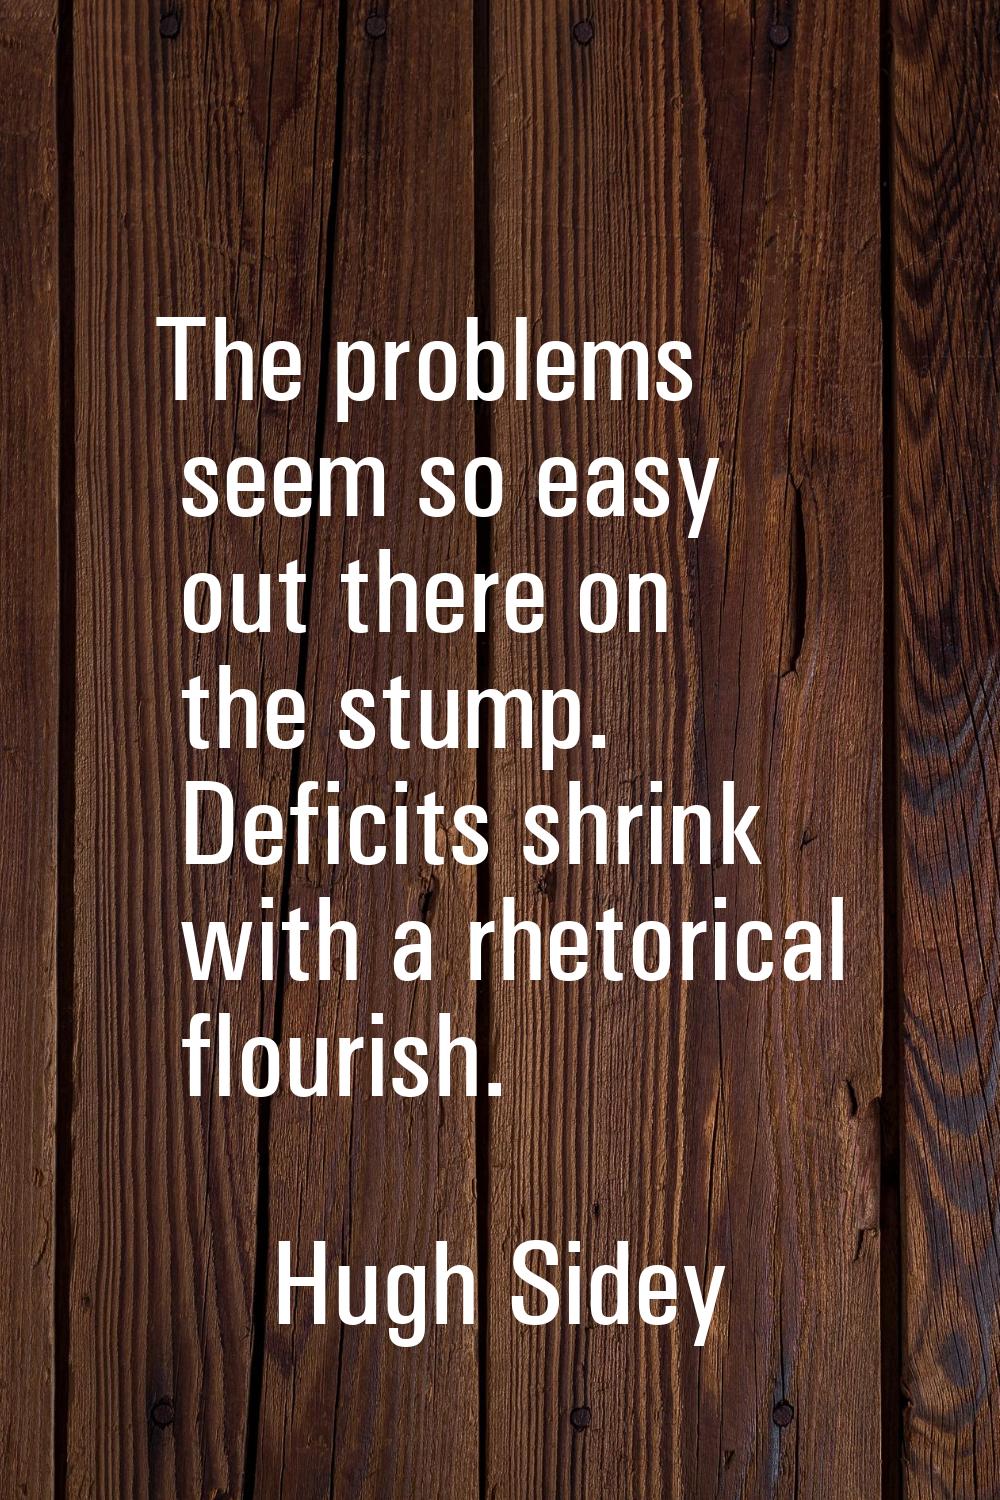 The problems seem so easy out there on the stump. Deficits shrink with a rhetorical flourish.